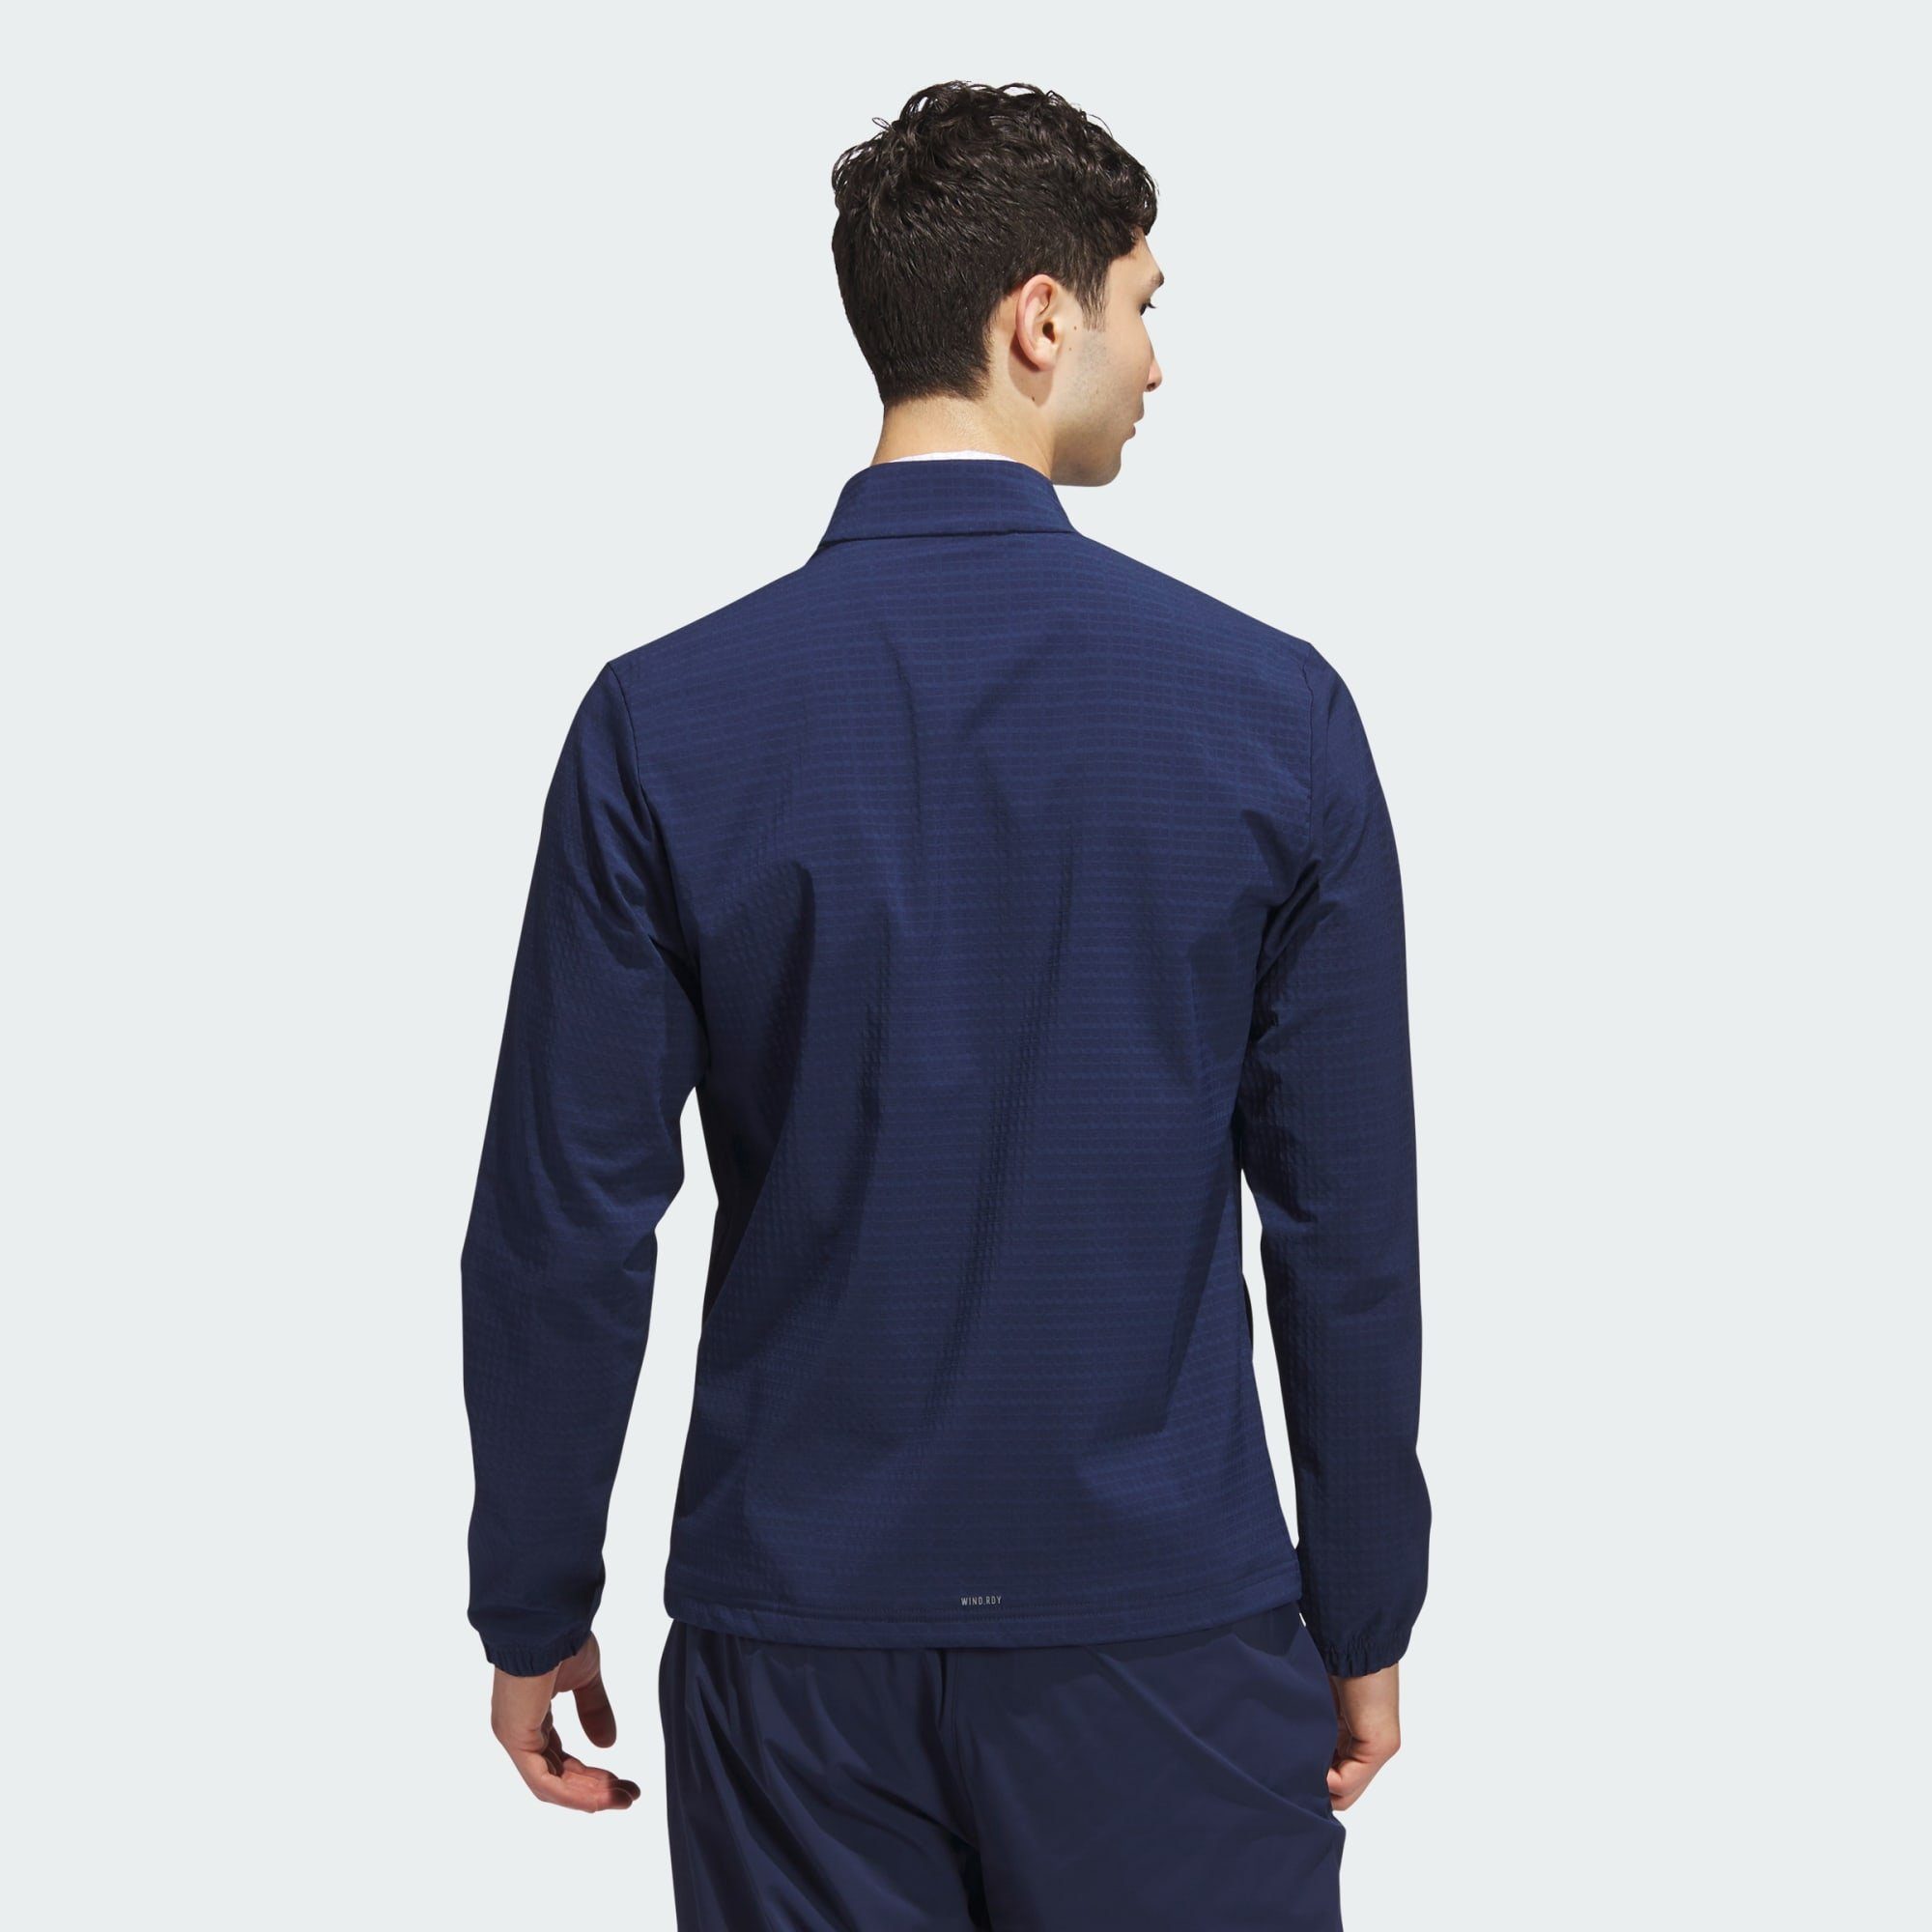 adidas Performance HALF-ZIP TOUR WIND.RDY ULTIMATE365 Funktionsjacke PULLOVER